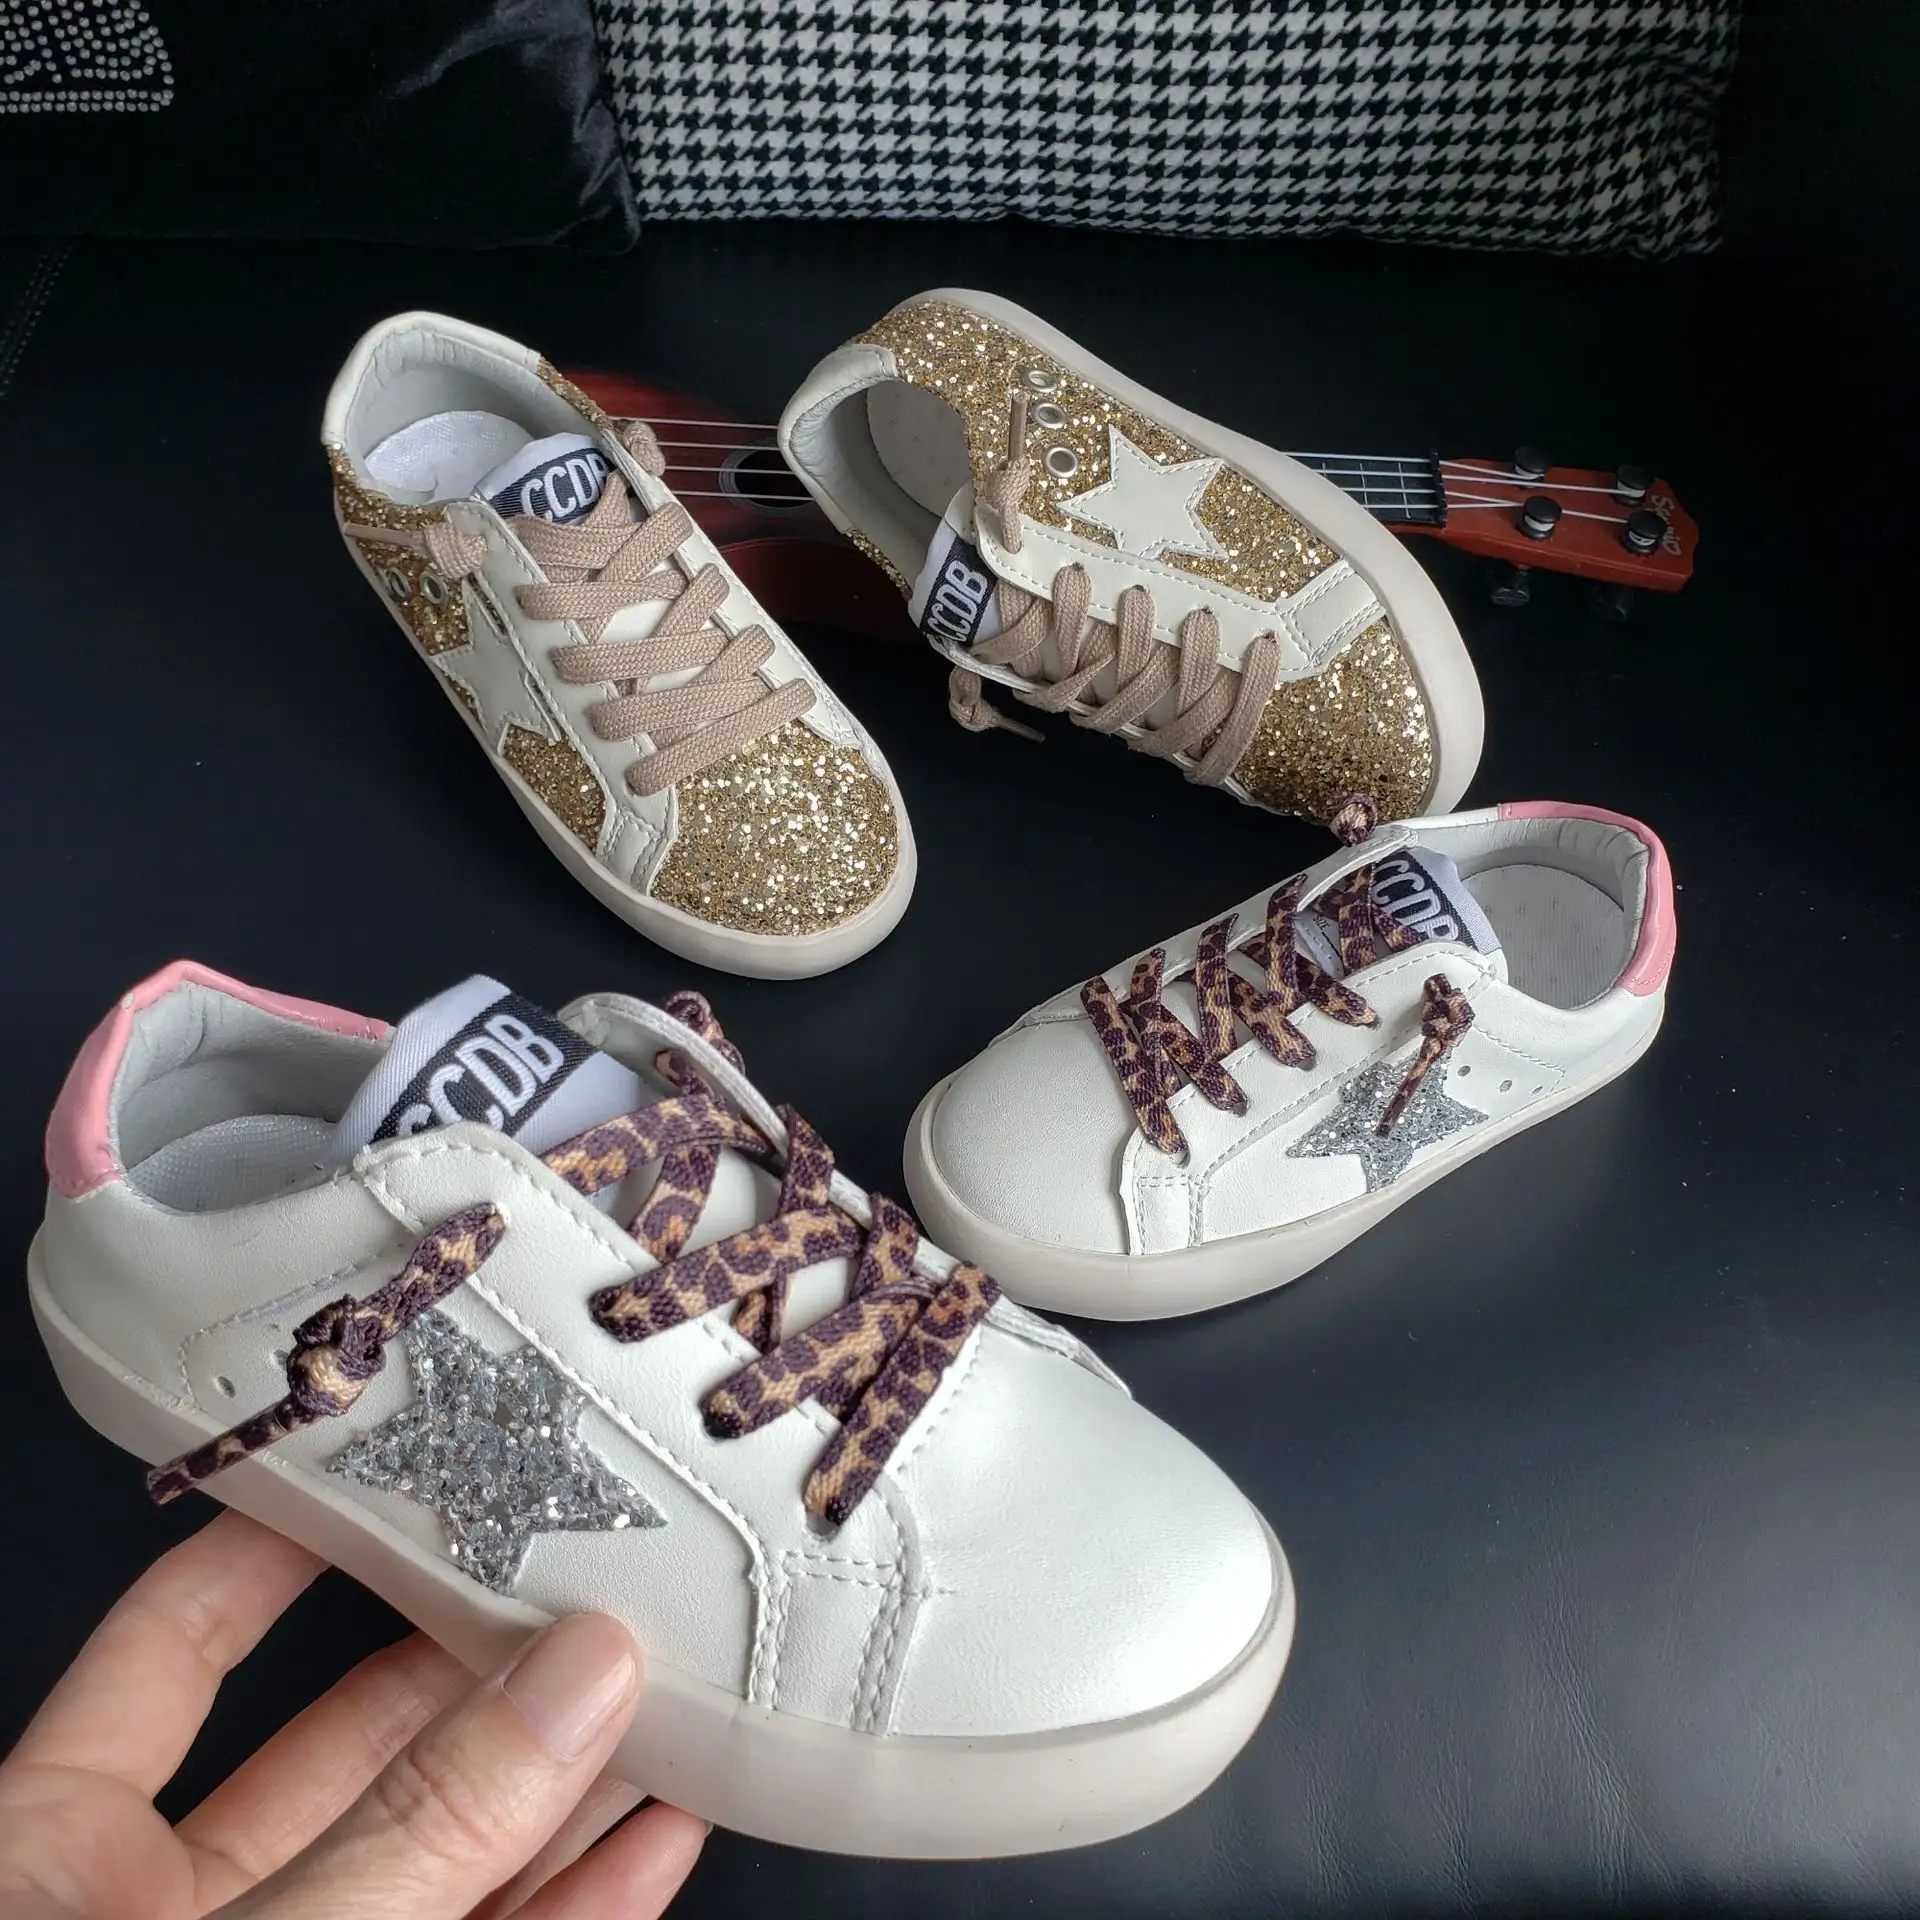 US size lace up Winter kids gold-en goose sneakers Boys and Girls Glitter Star Distress retro inspired dirtier casual Shoes